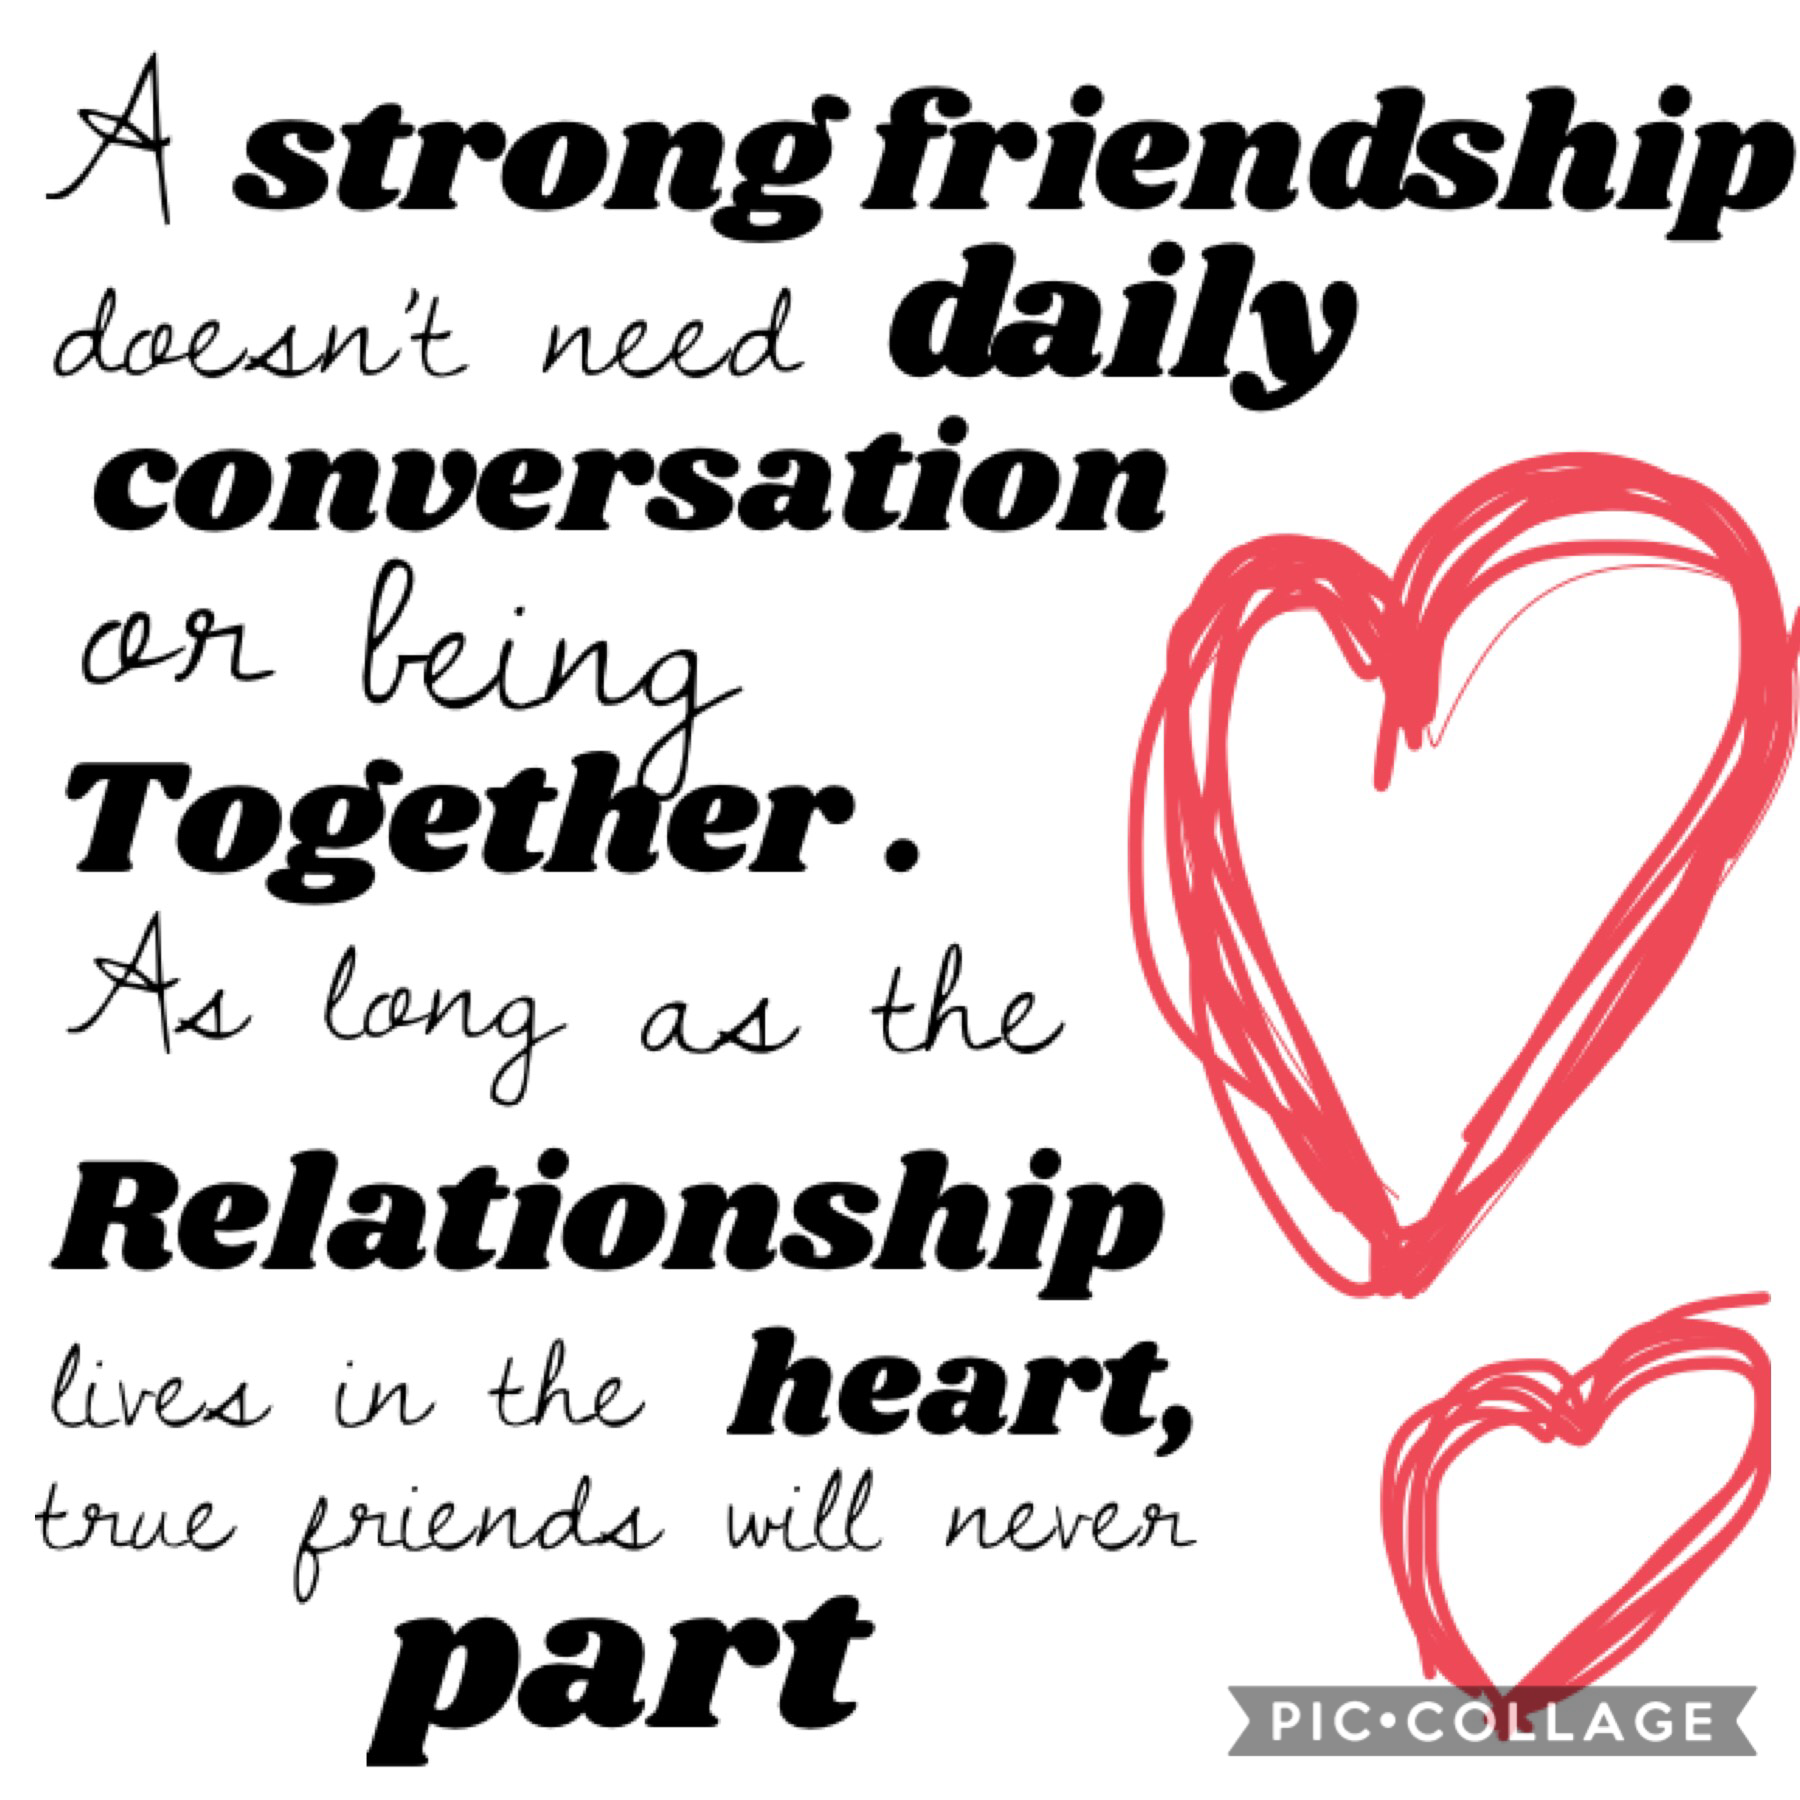 Do you have a strong relationship with someone?